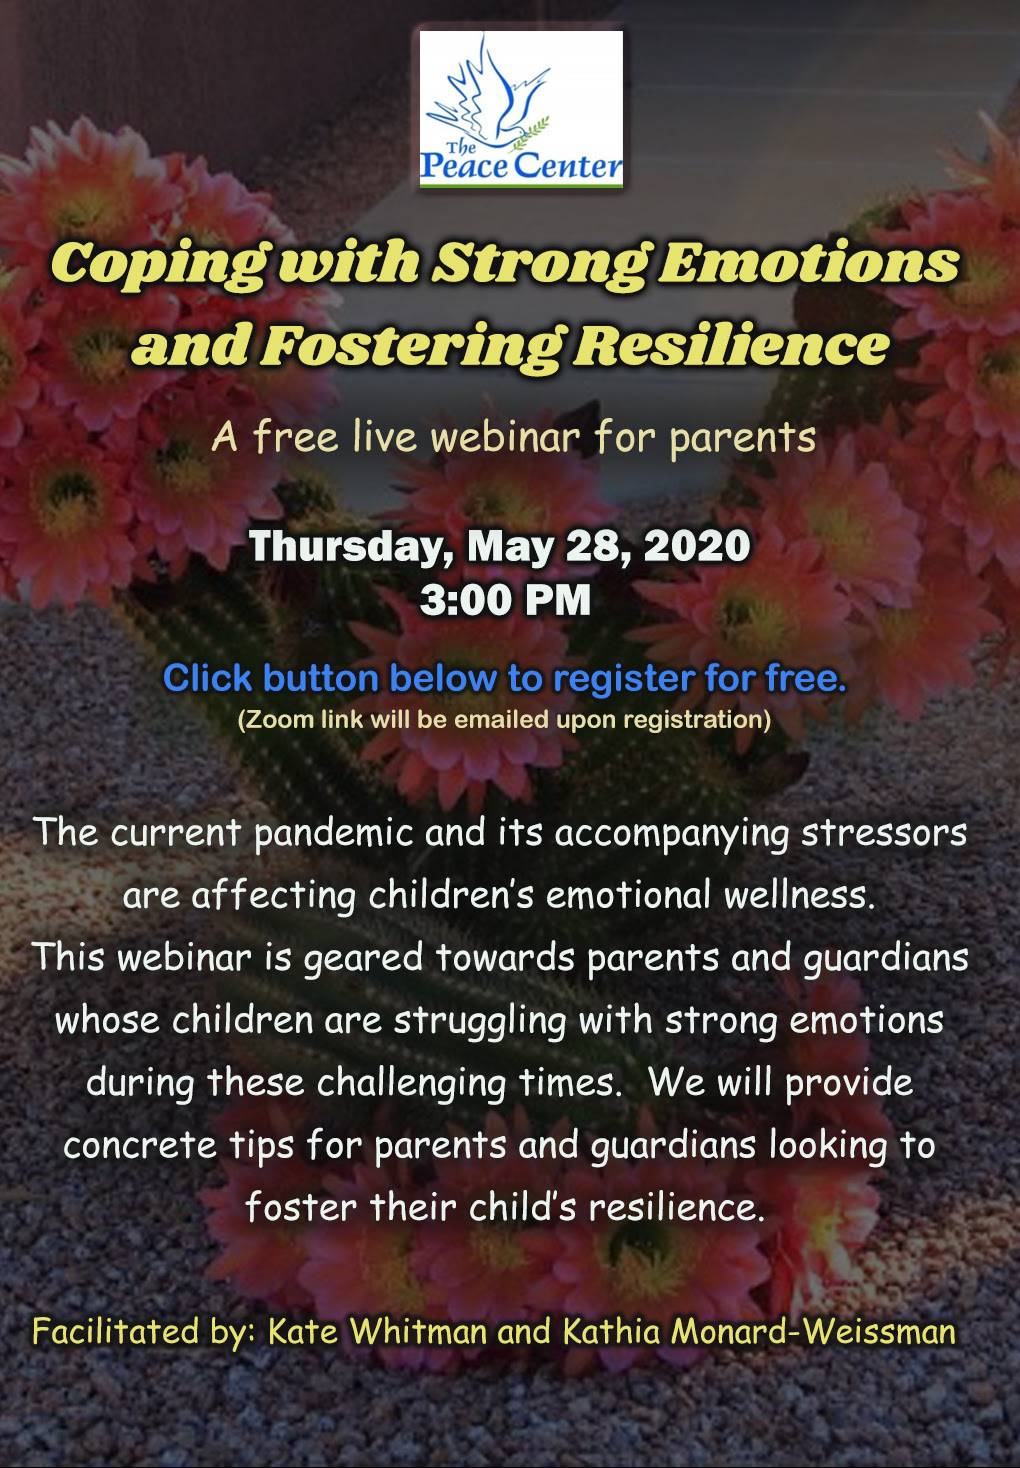 BOUNCE BACK - A Webinar for Parents on Fostering Resilience @ Online - Zoom